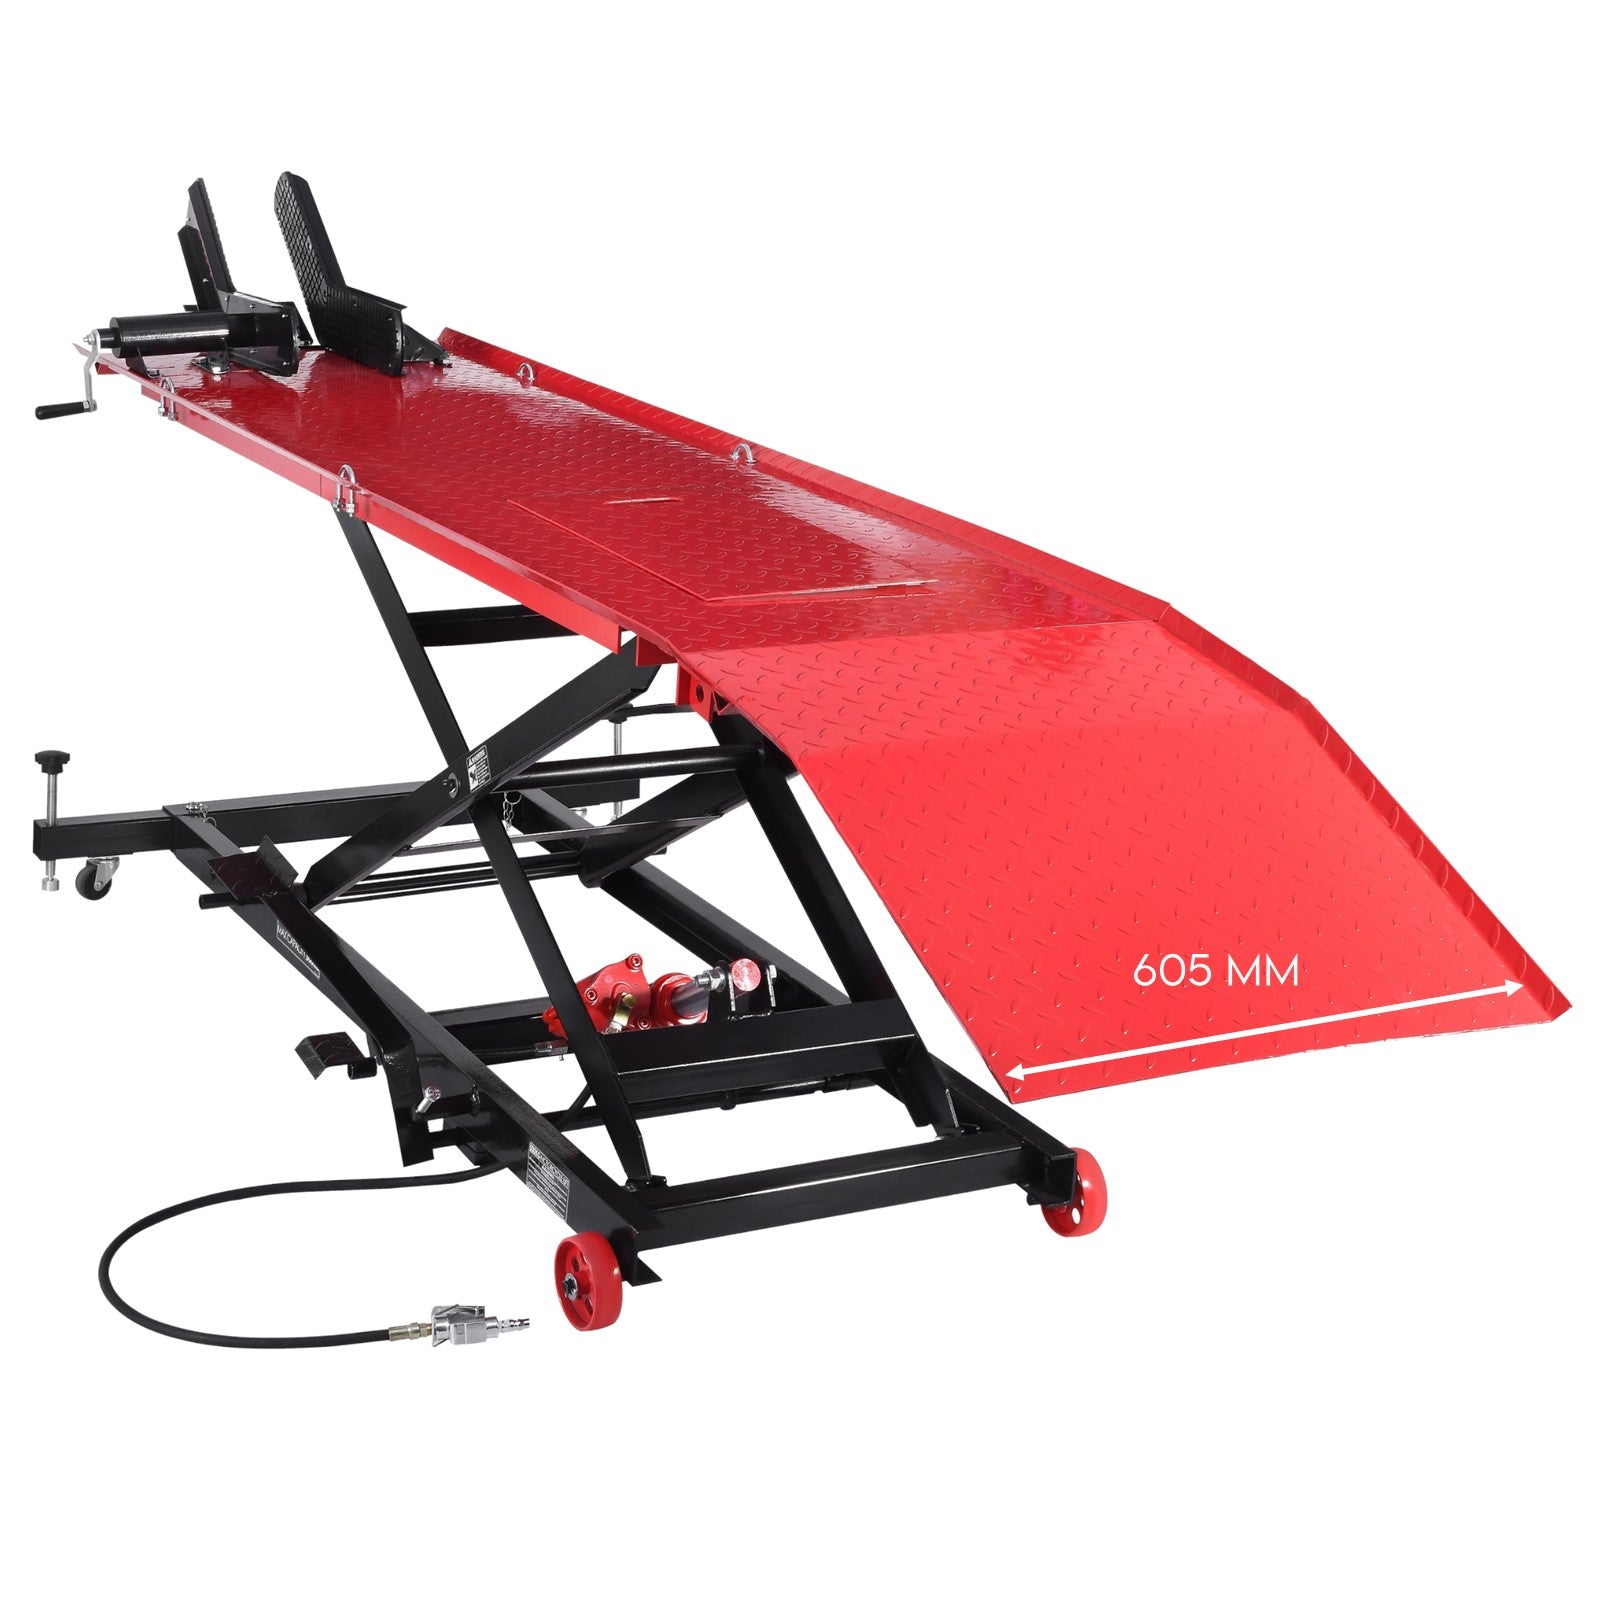 Motorcycle Lift Table - Hydraulic & Air